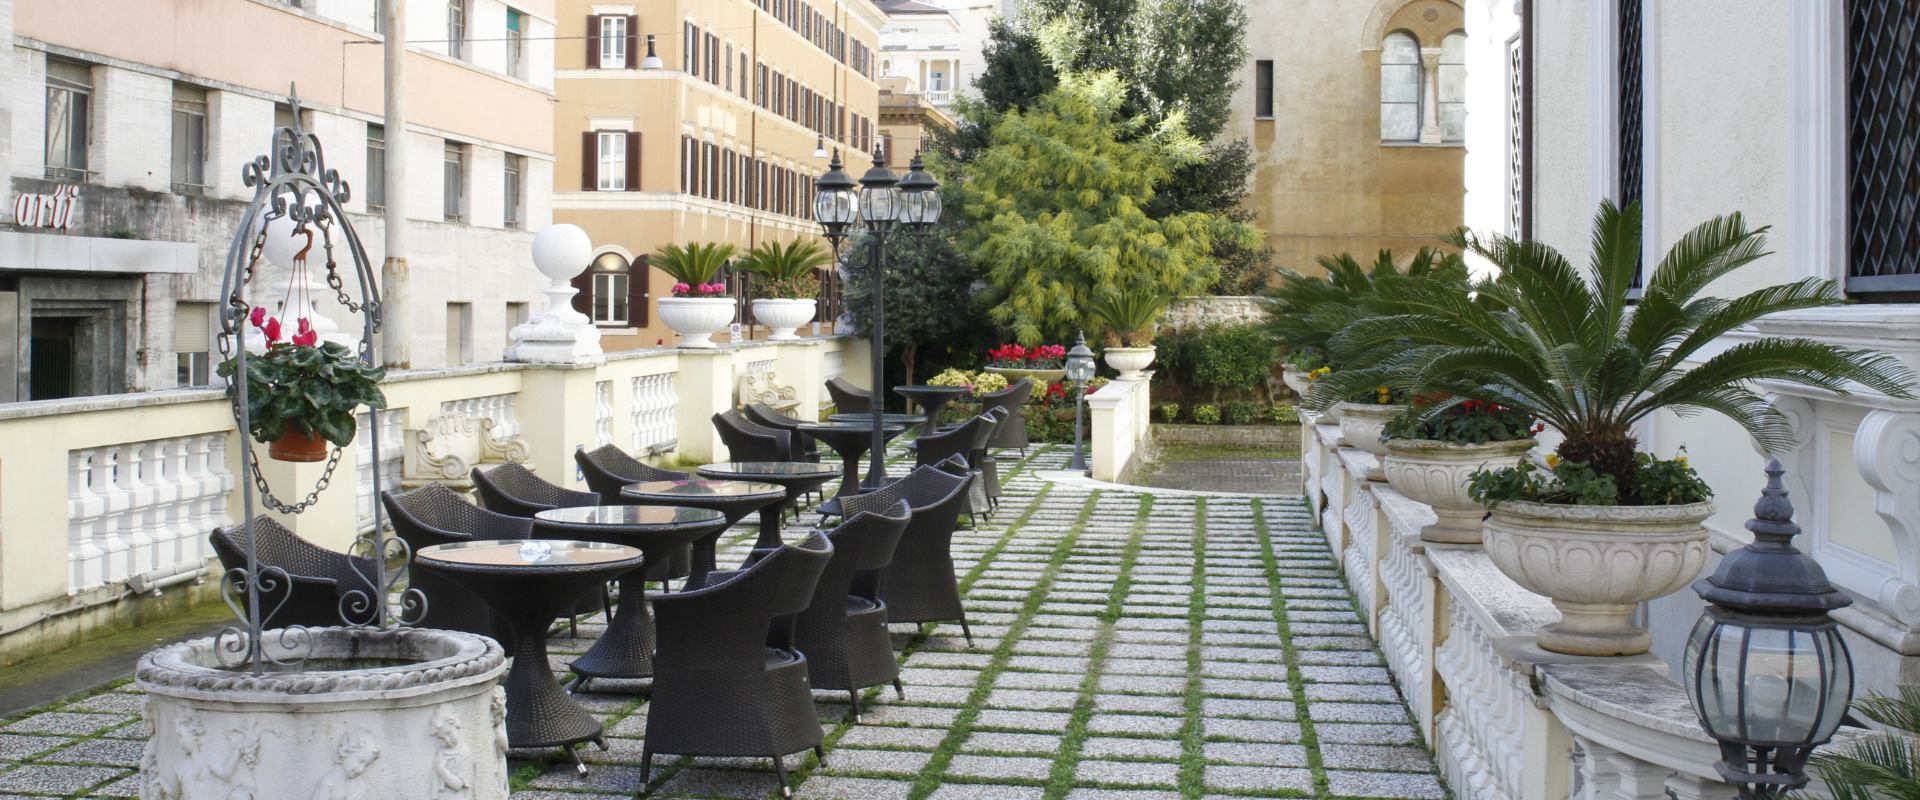 An experience you simply cannot miss Villa Pinciana Hotel Rome